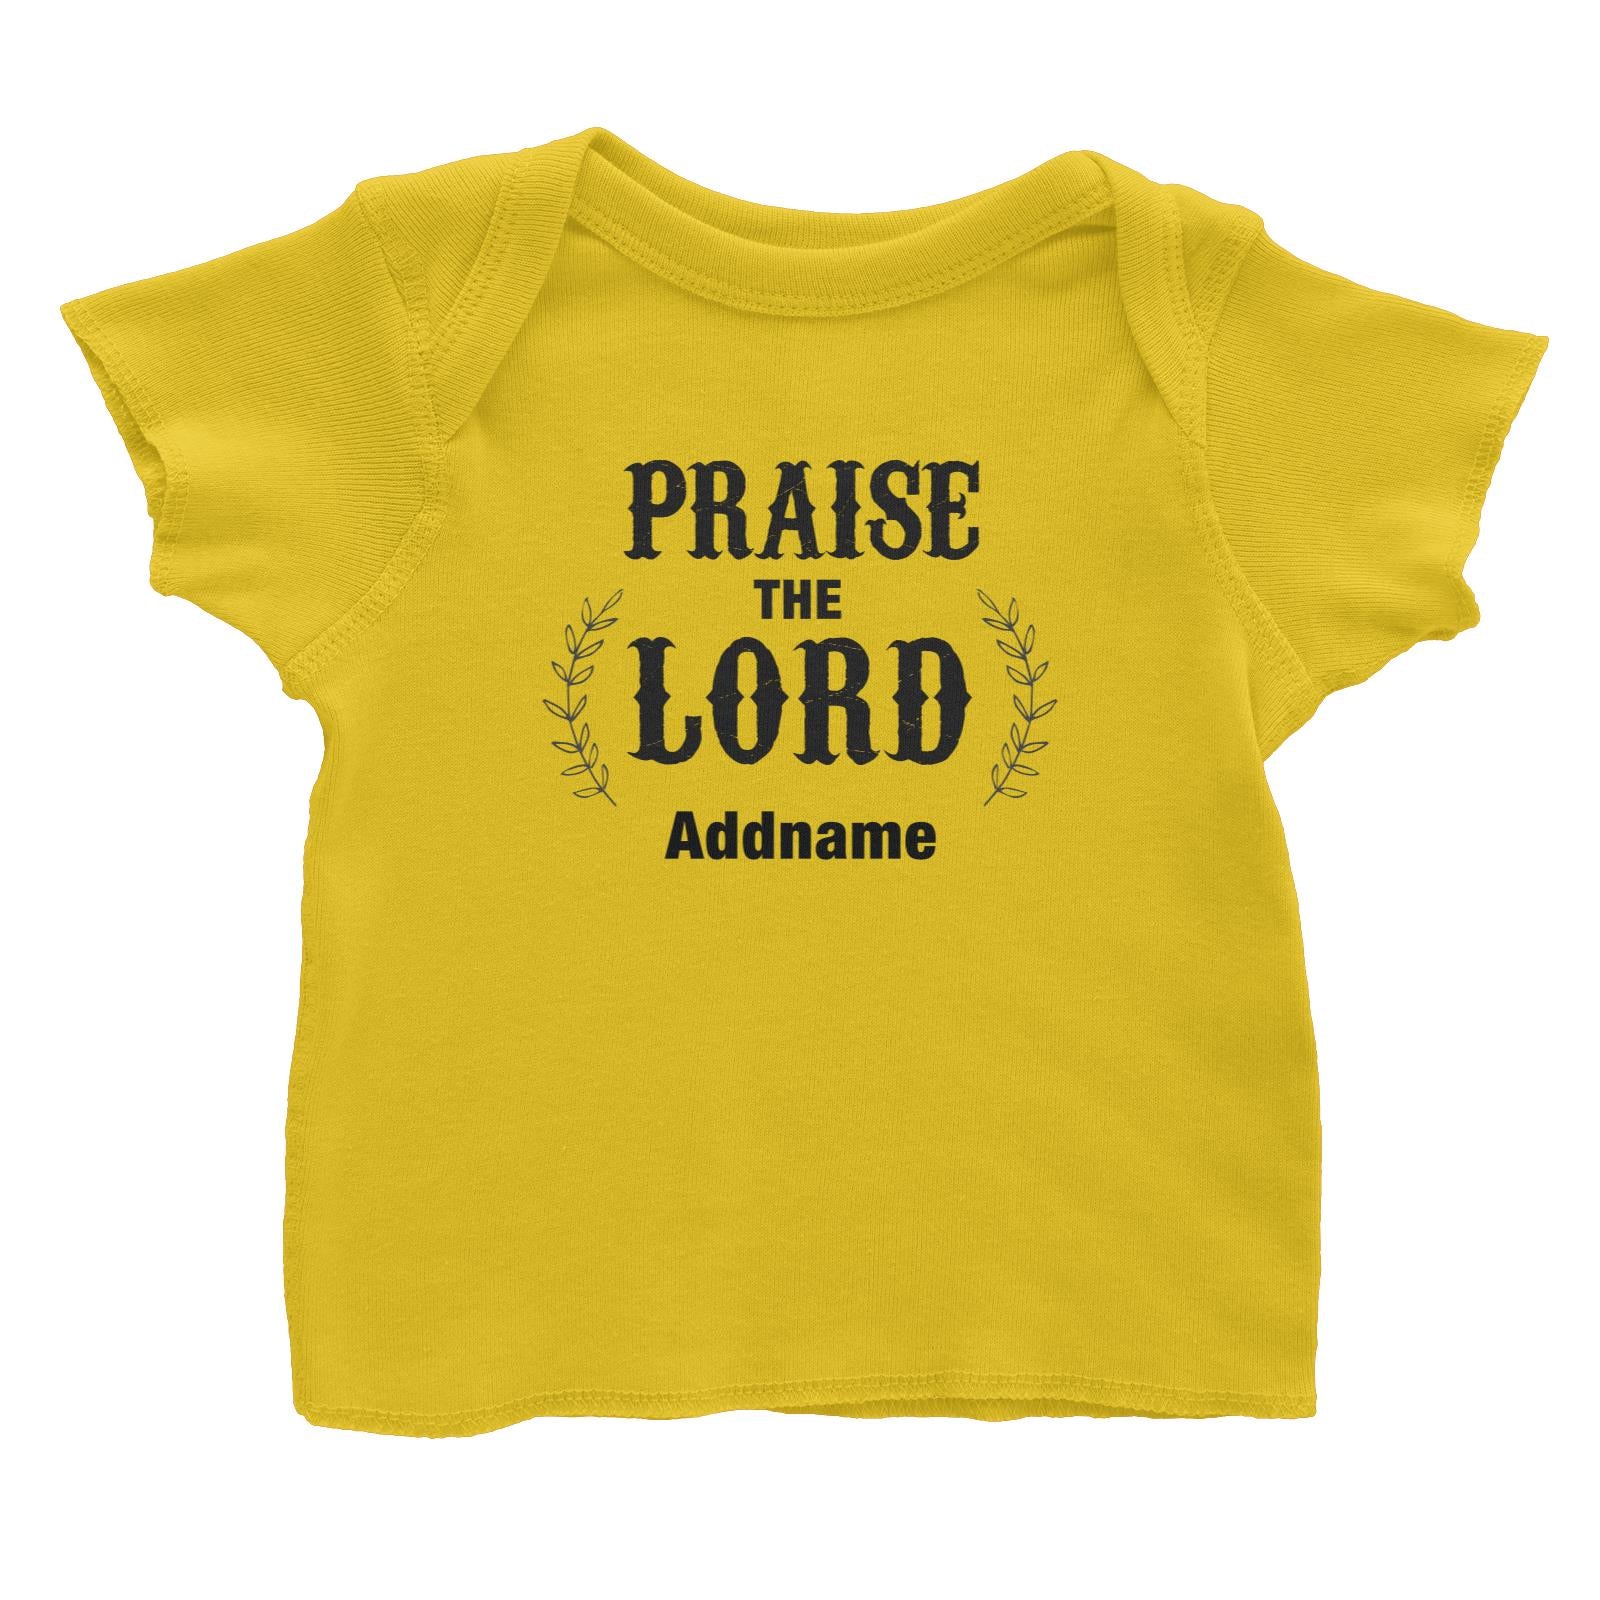 Christian Series Praise The Lord Addname Baby T-Shirt